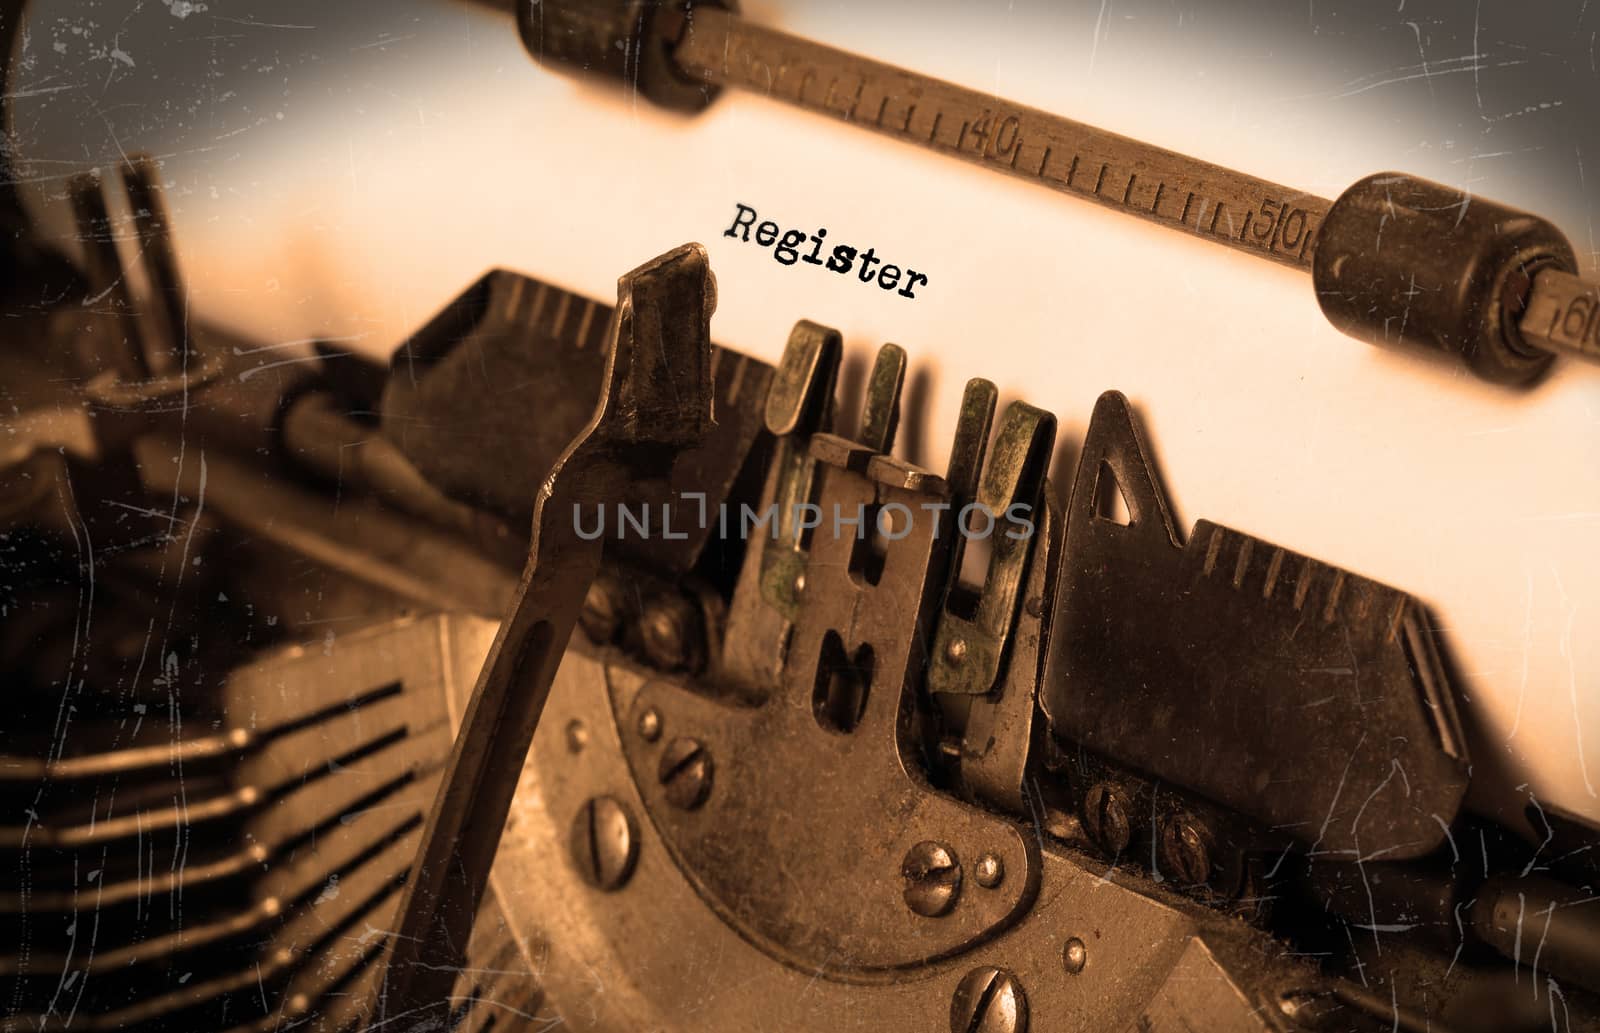 Close-up of an old typewriter with paper, selective focus, register